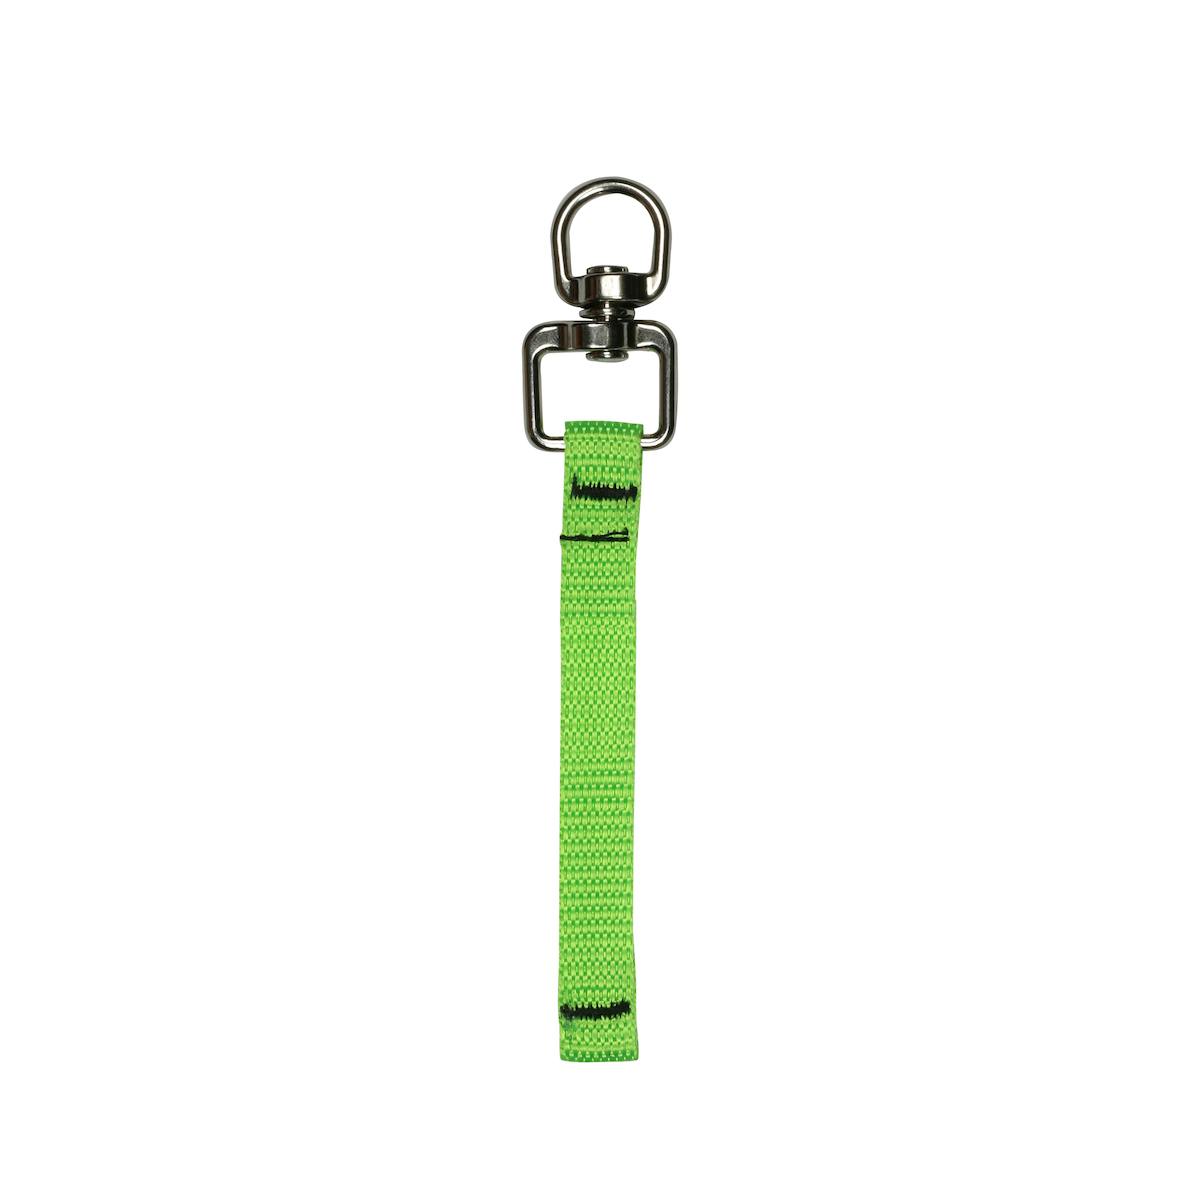 Webbing Tool Connector 4.5" - 3 lbs. maximum load limit - Retail Packaged, Green (533-100352) - OS_1